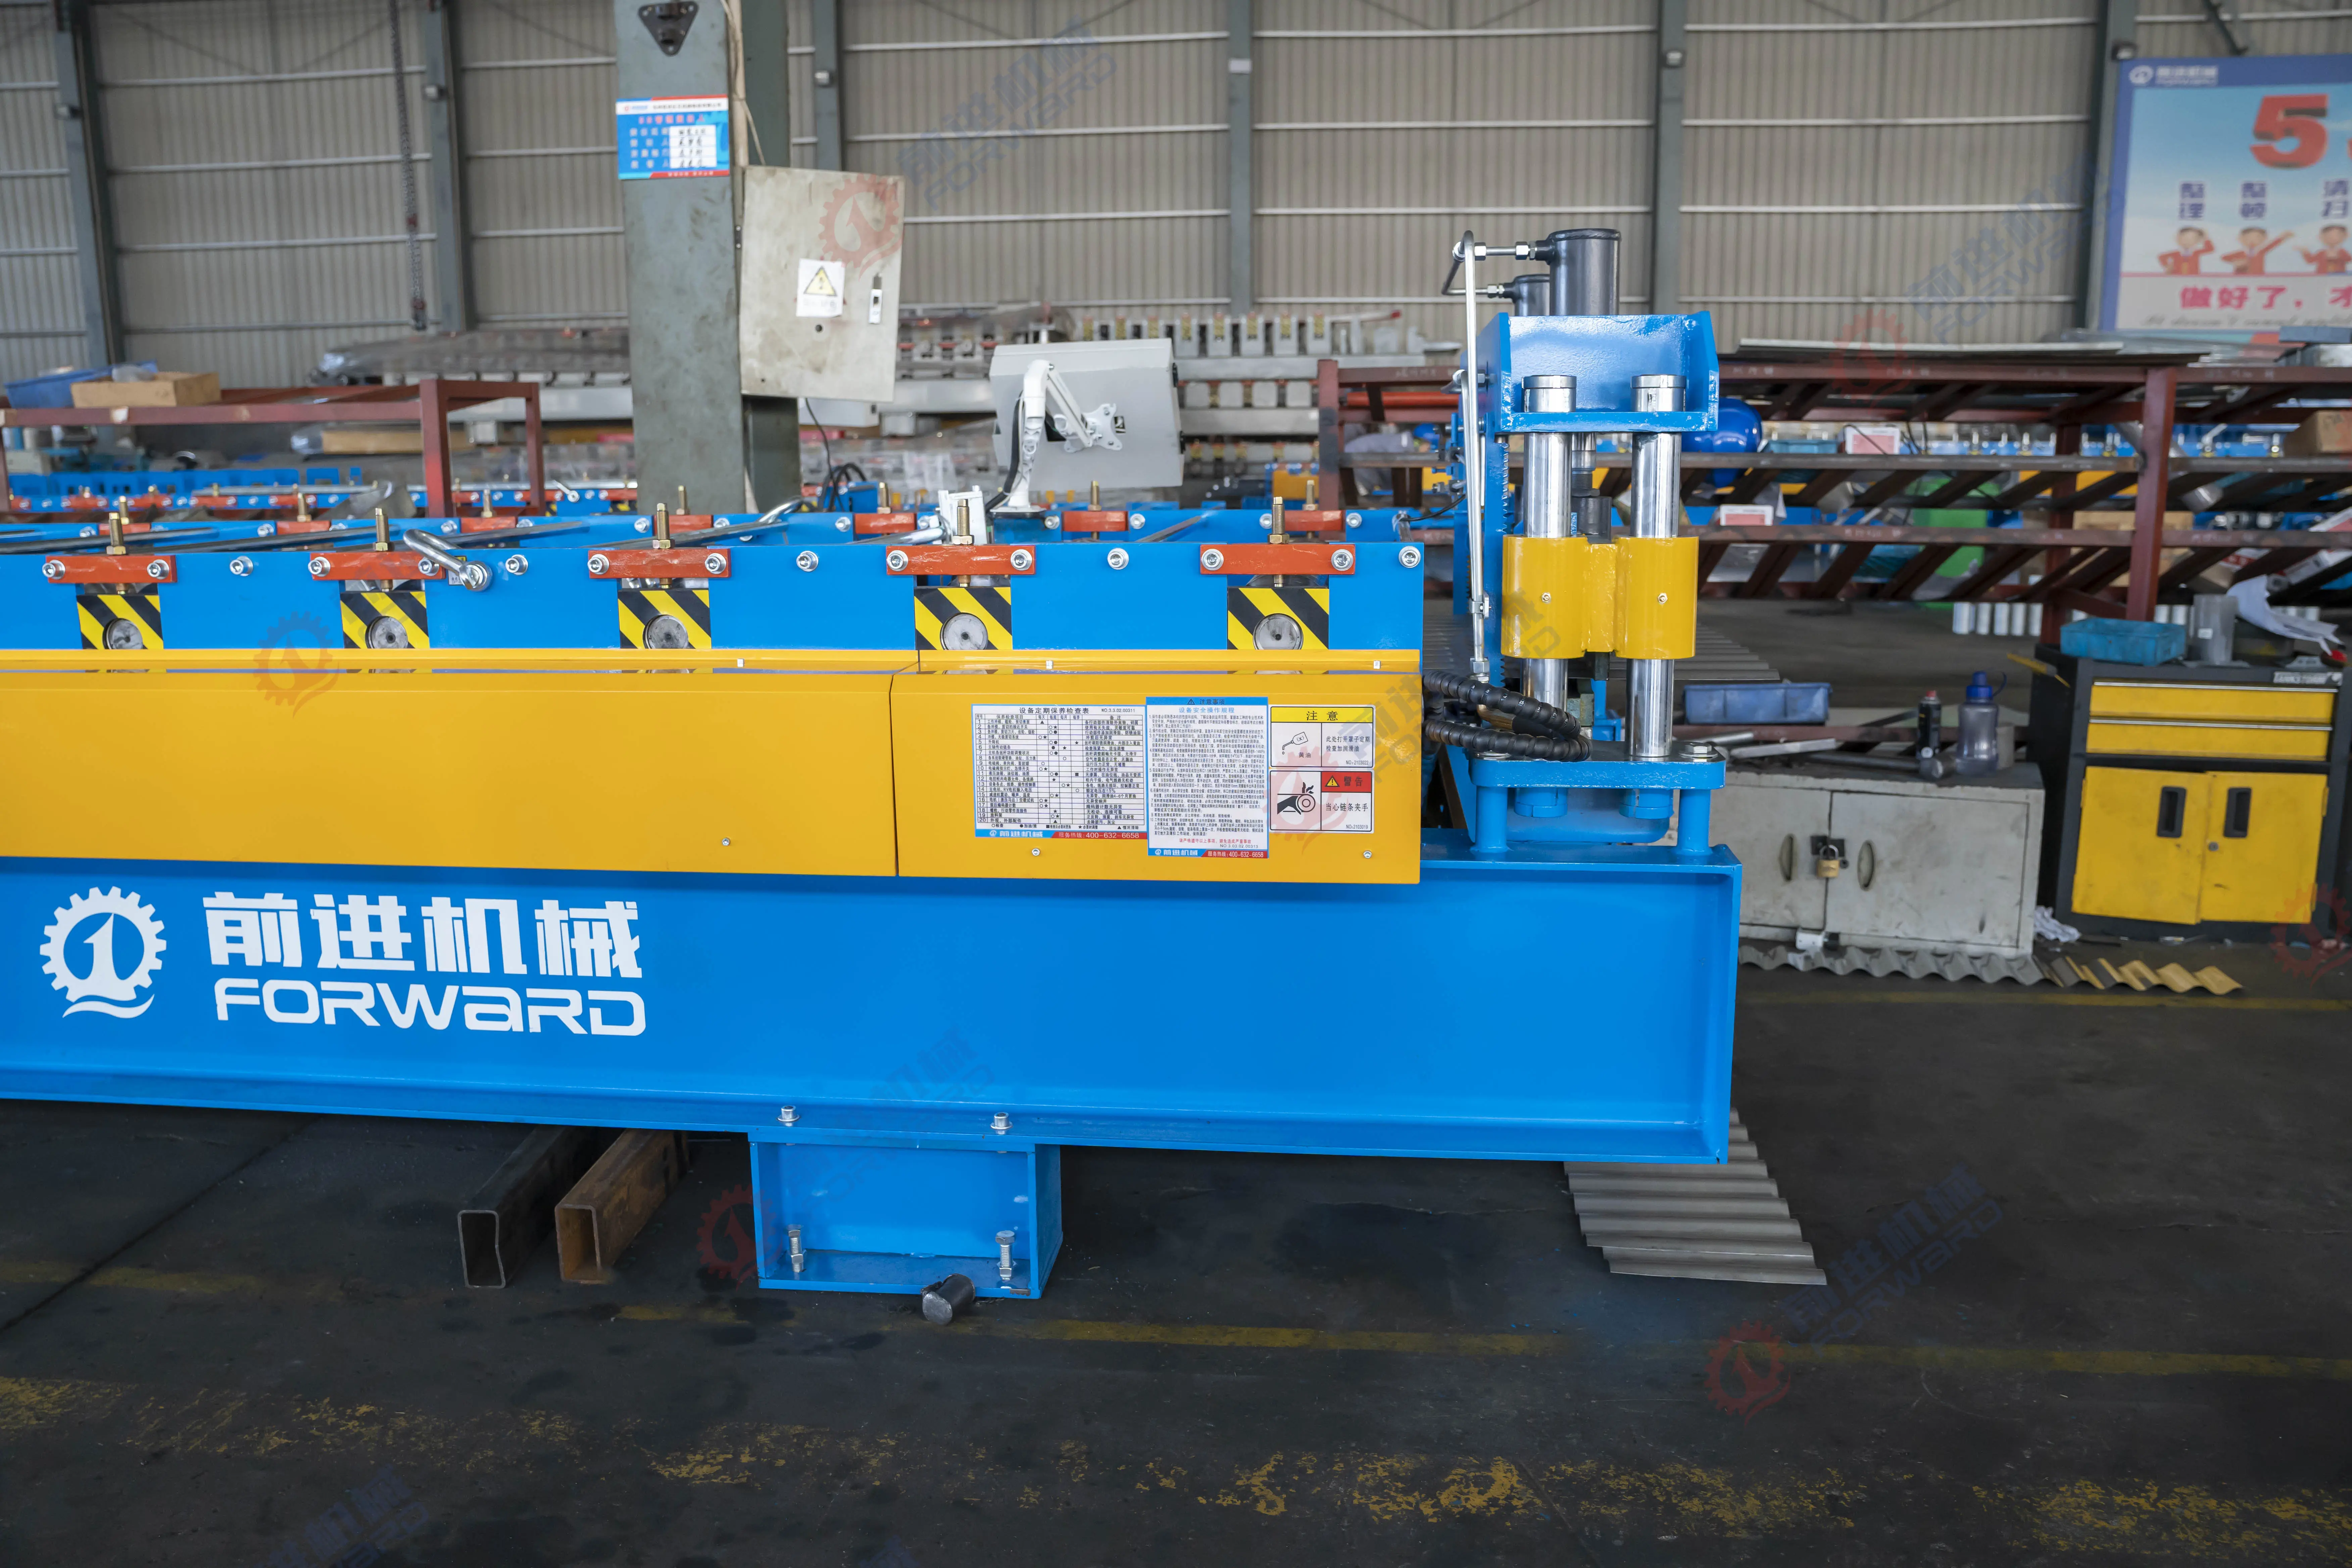 FORWARD Advanced Corrugated Roof Sheet Machine for Seamless Operation